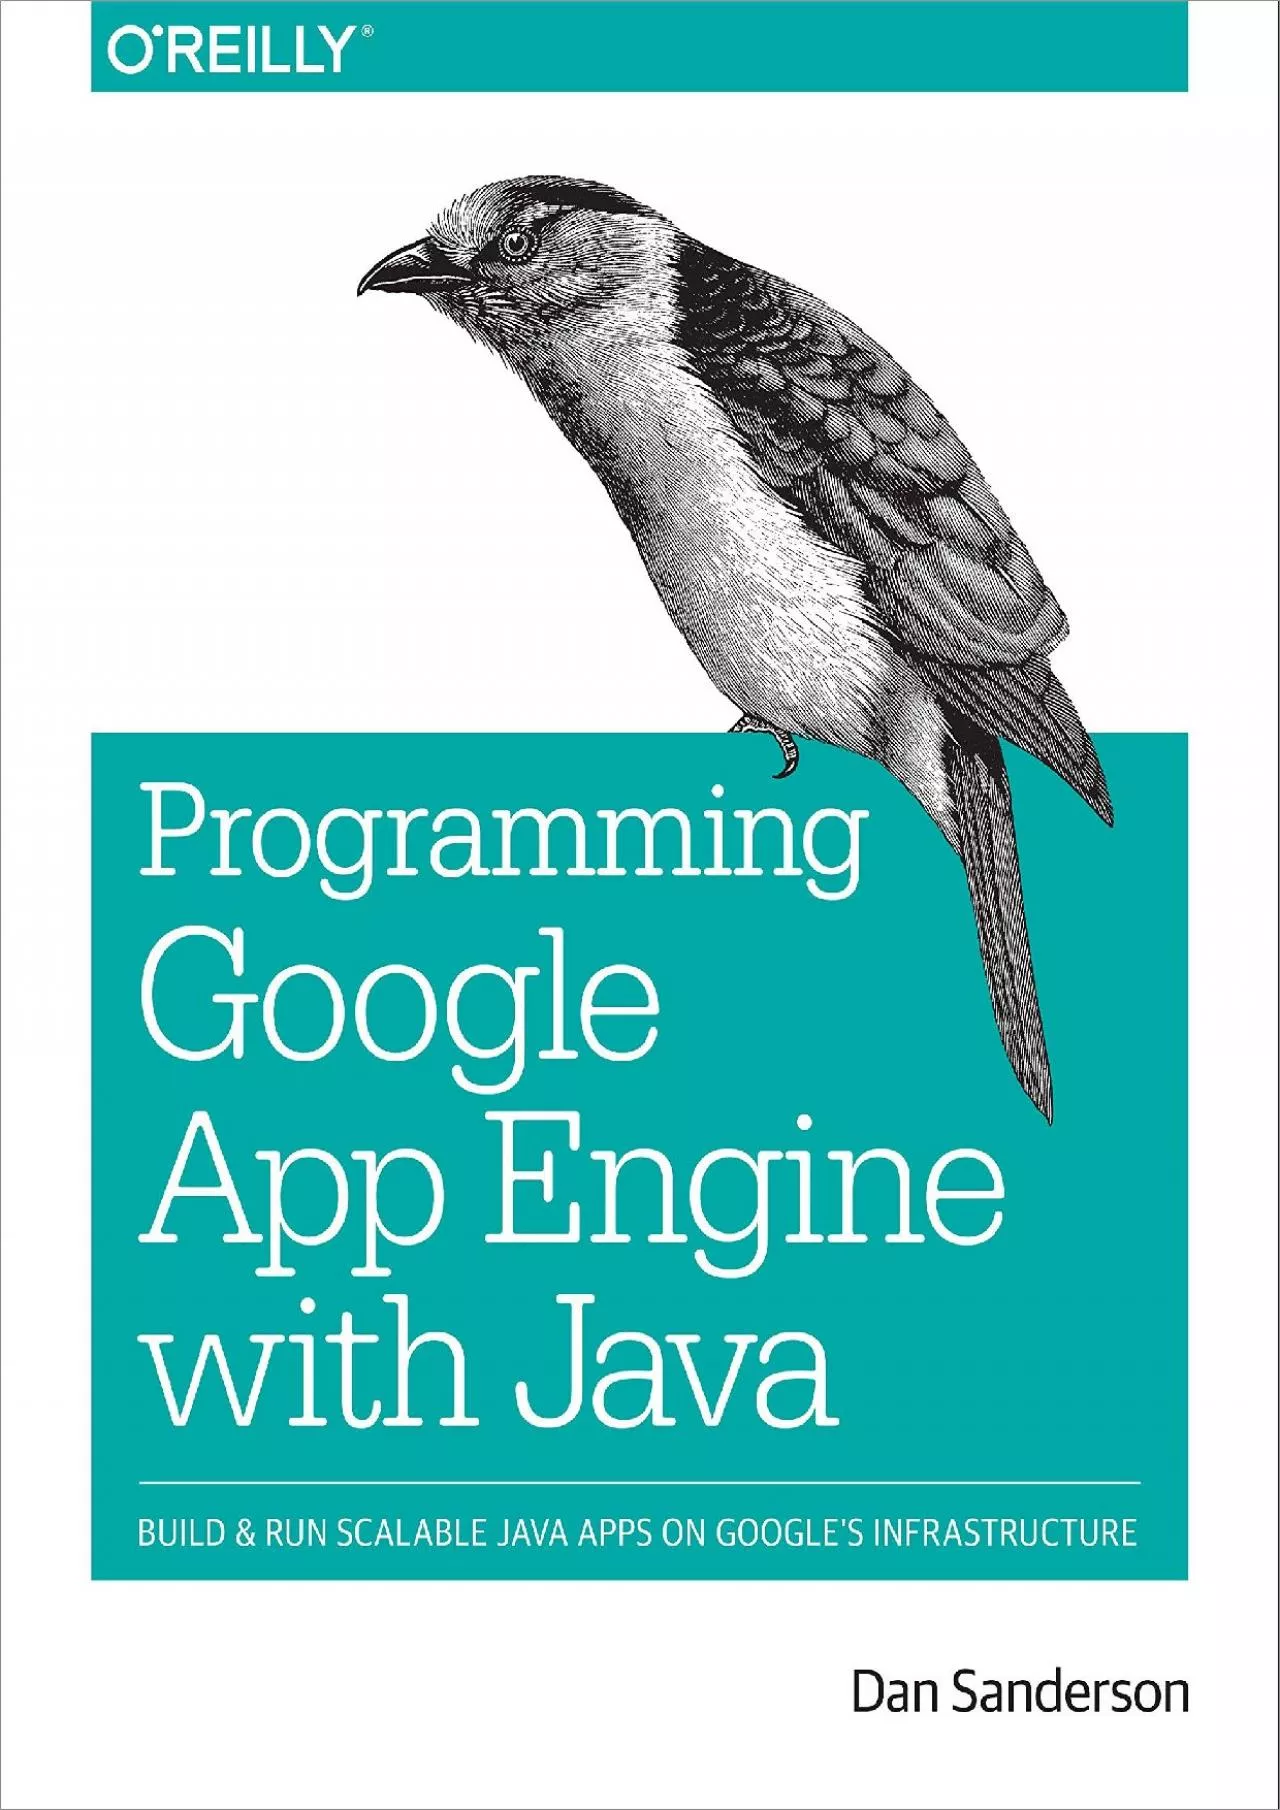 (BOOK)-Programming Google App Engine with Java: Build & Run Scalable Java Applications